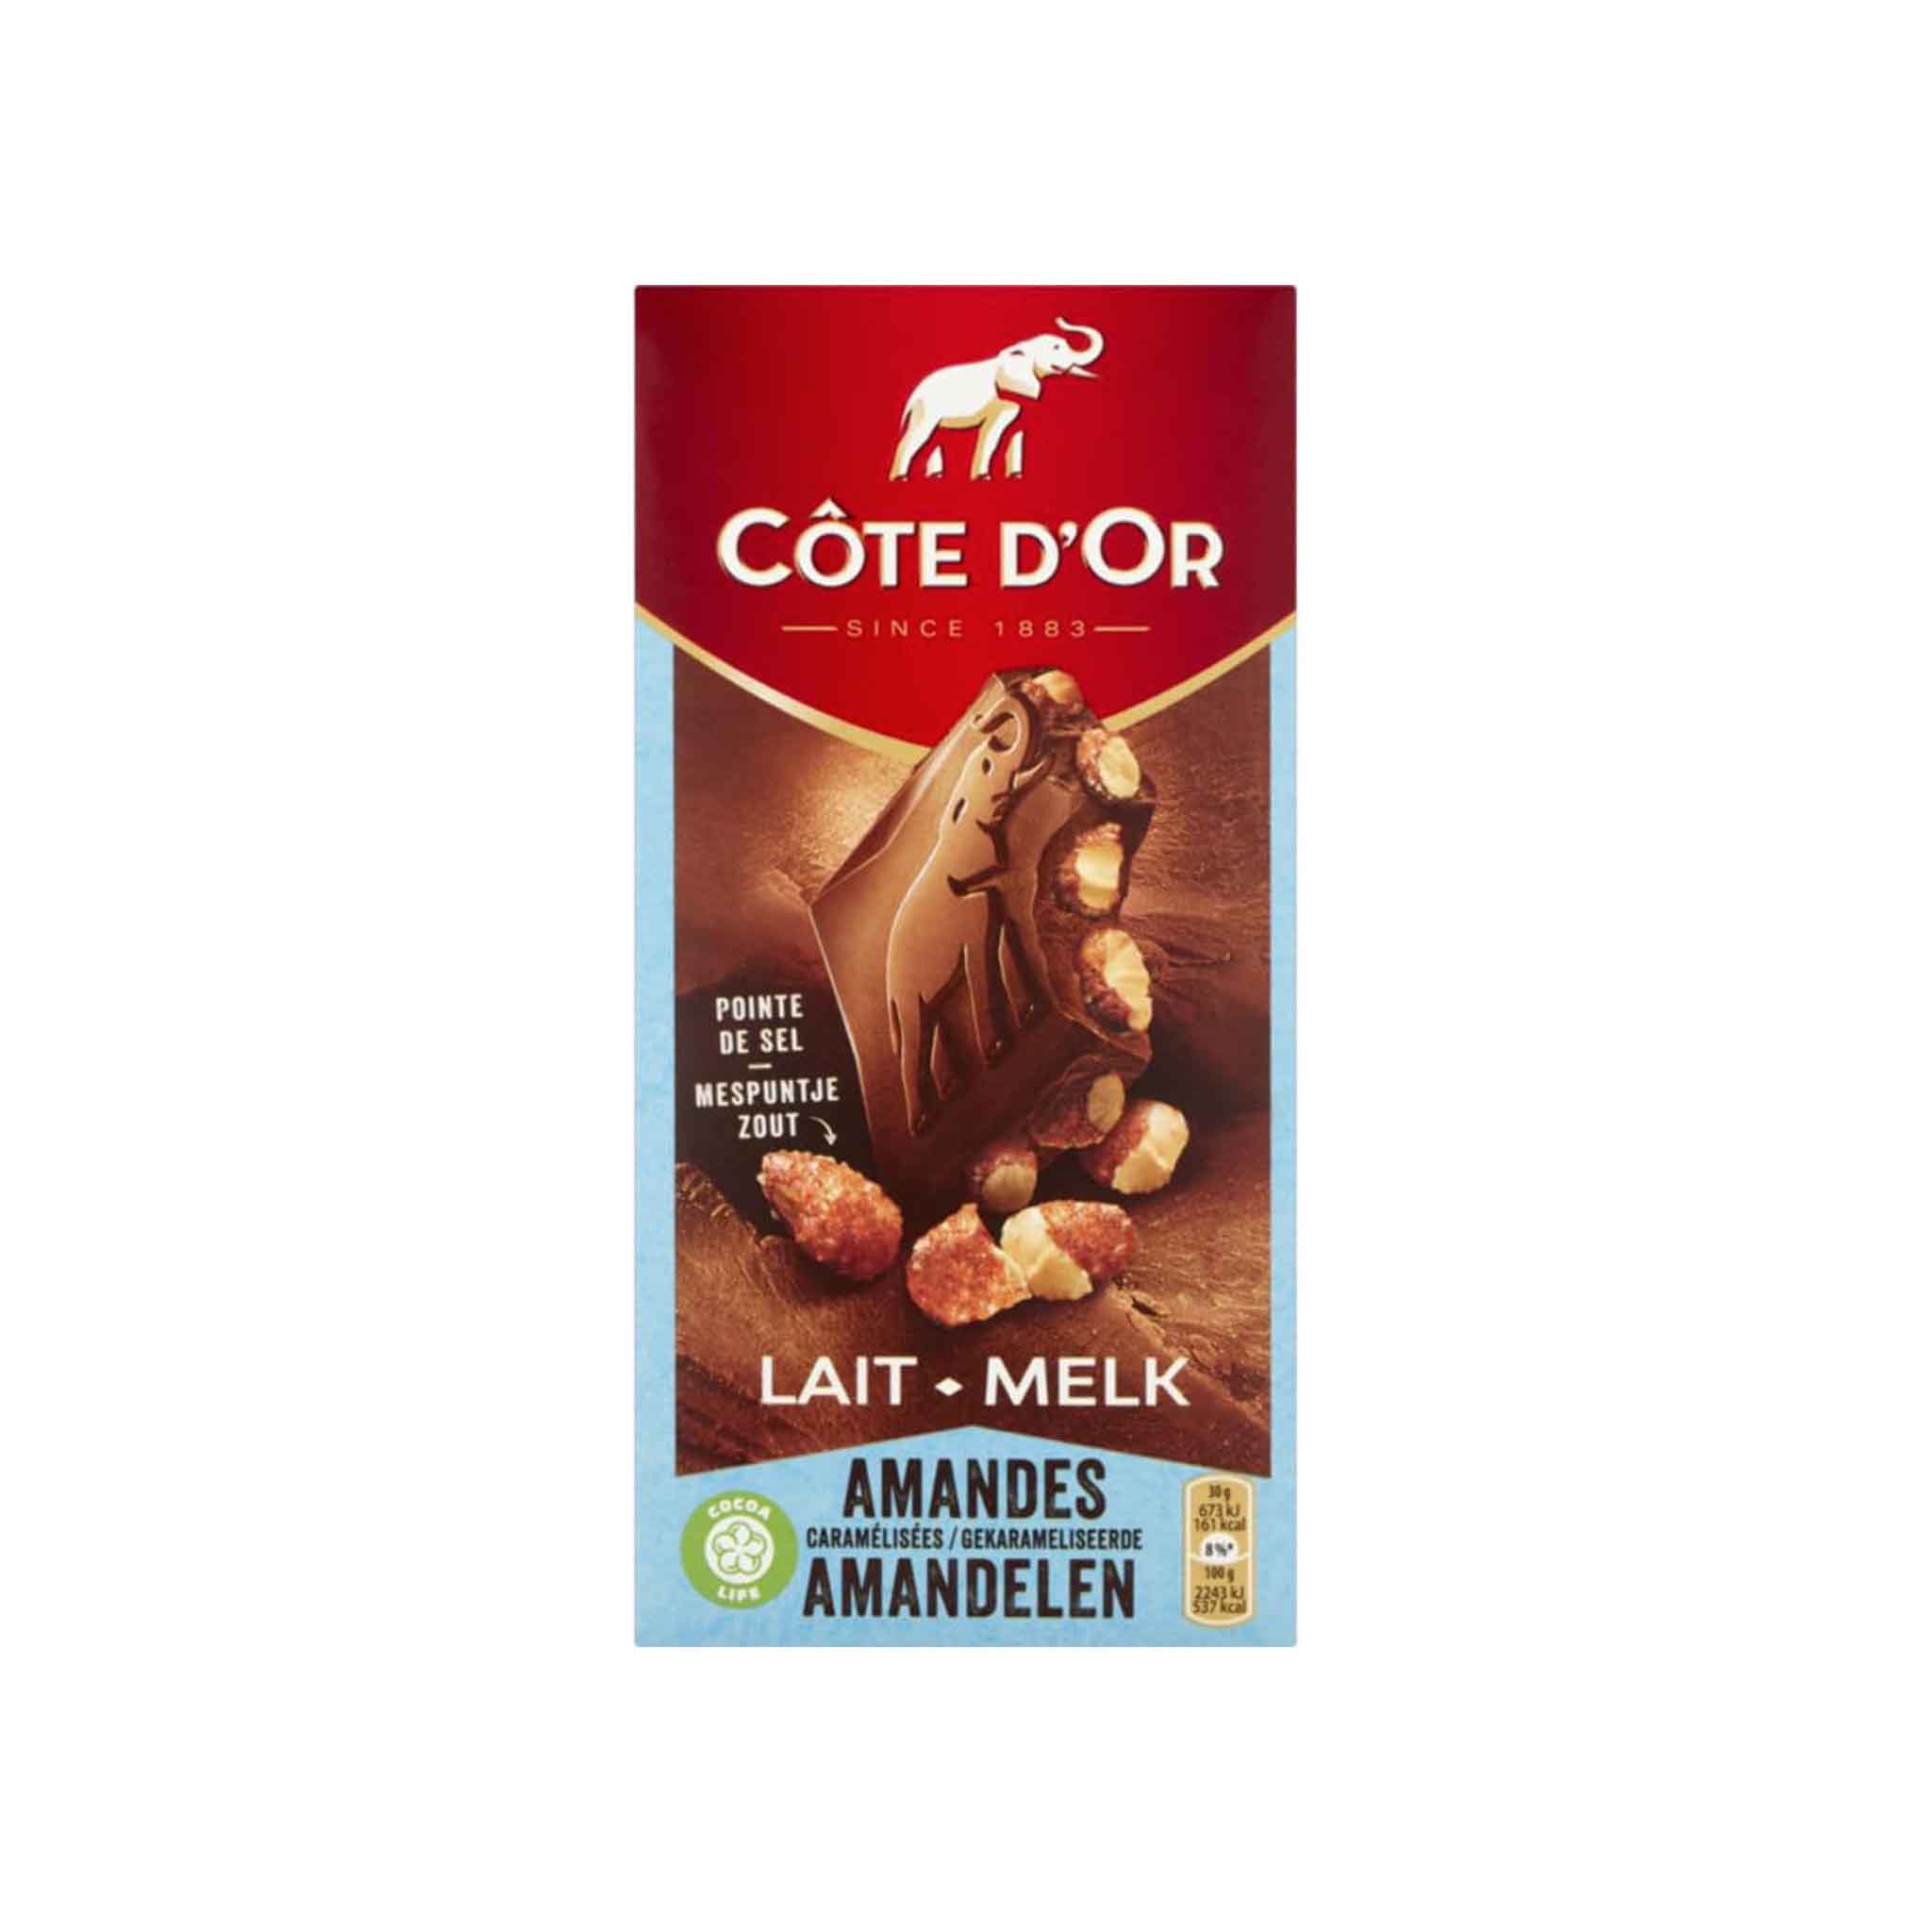 COTE D'OR MILK CHOCOLATE CARAMELIZED ALMOND 180g